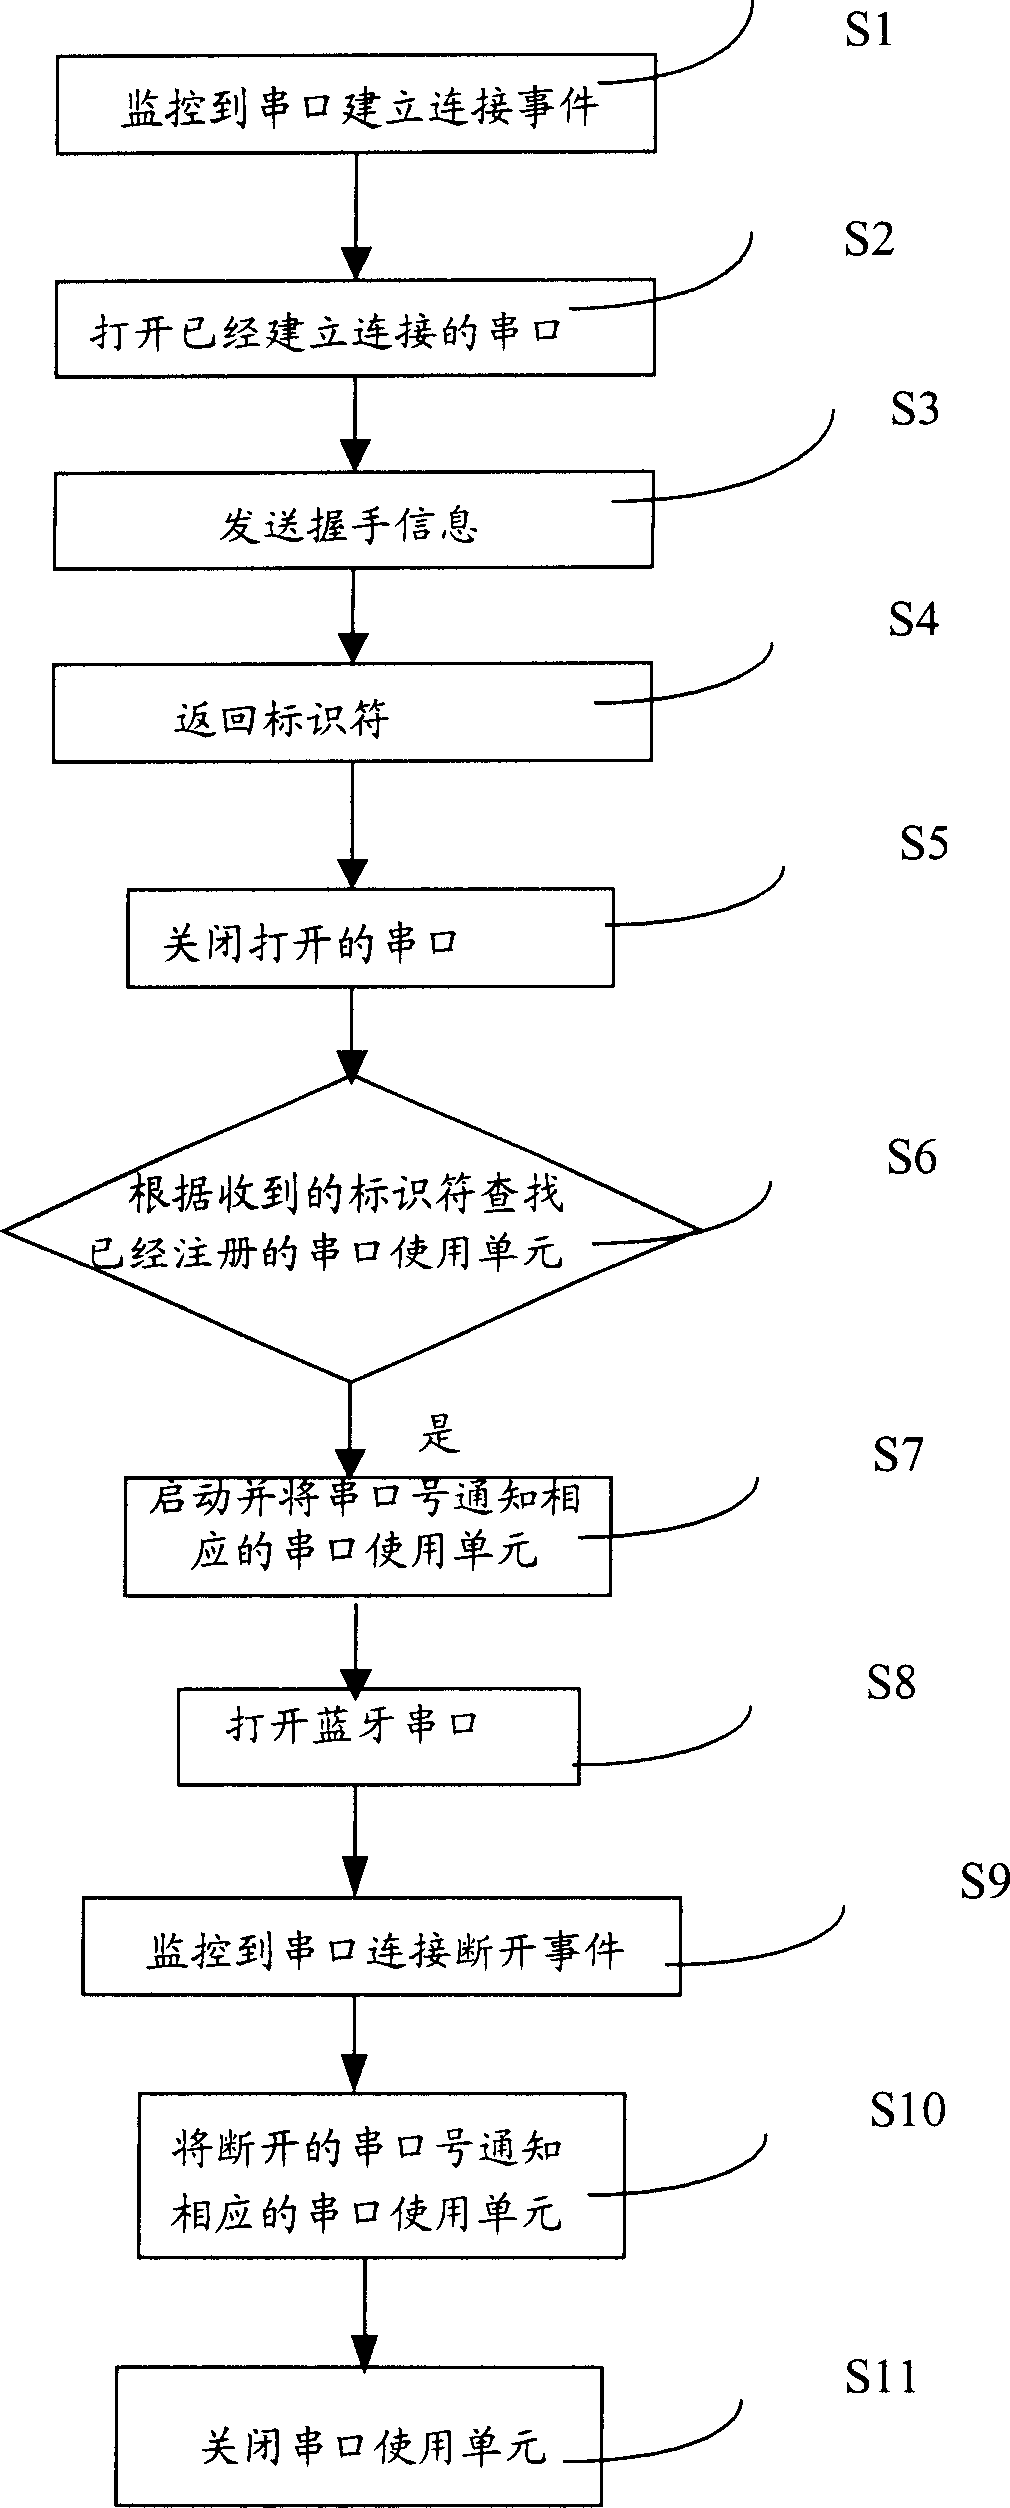 Method and system of communicating via bluetooth serial port